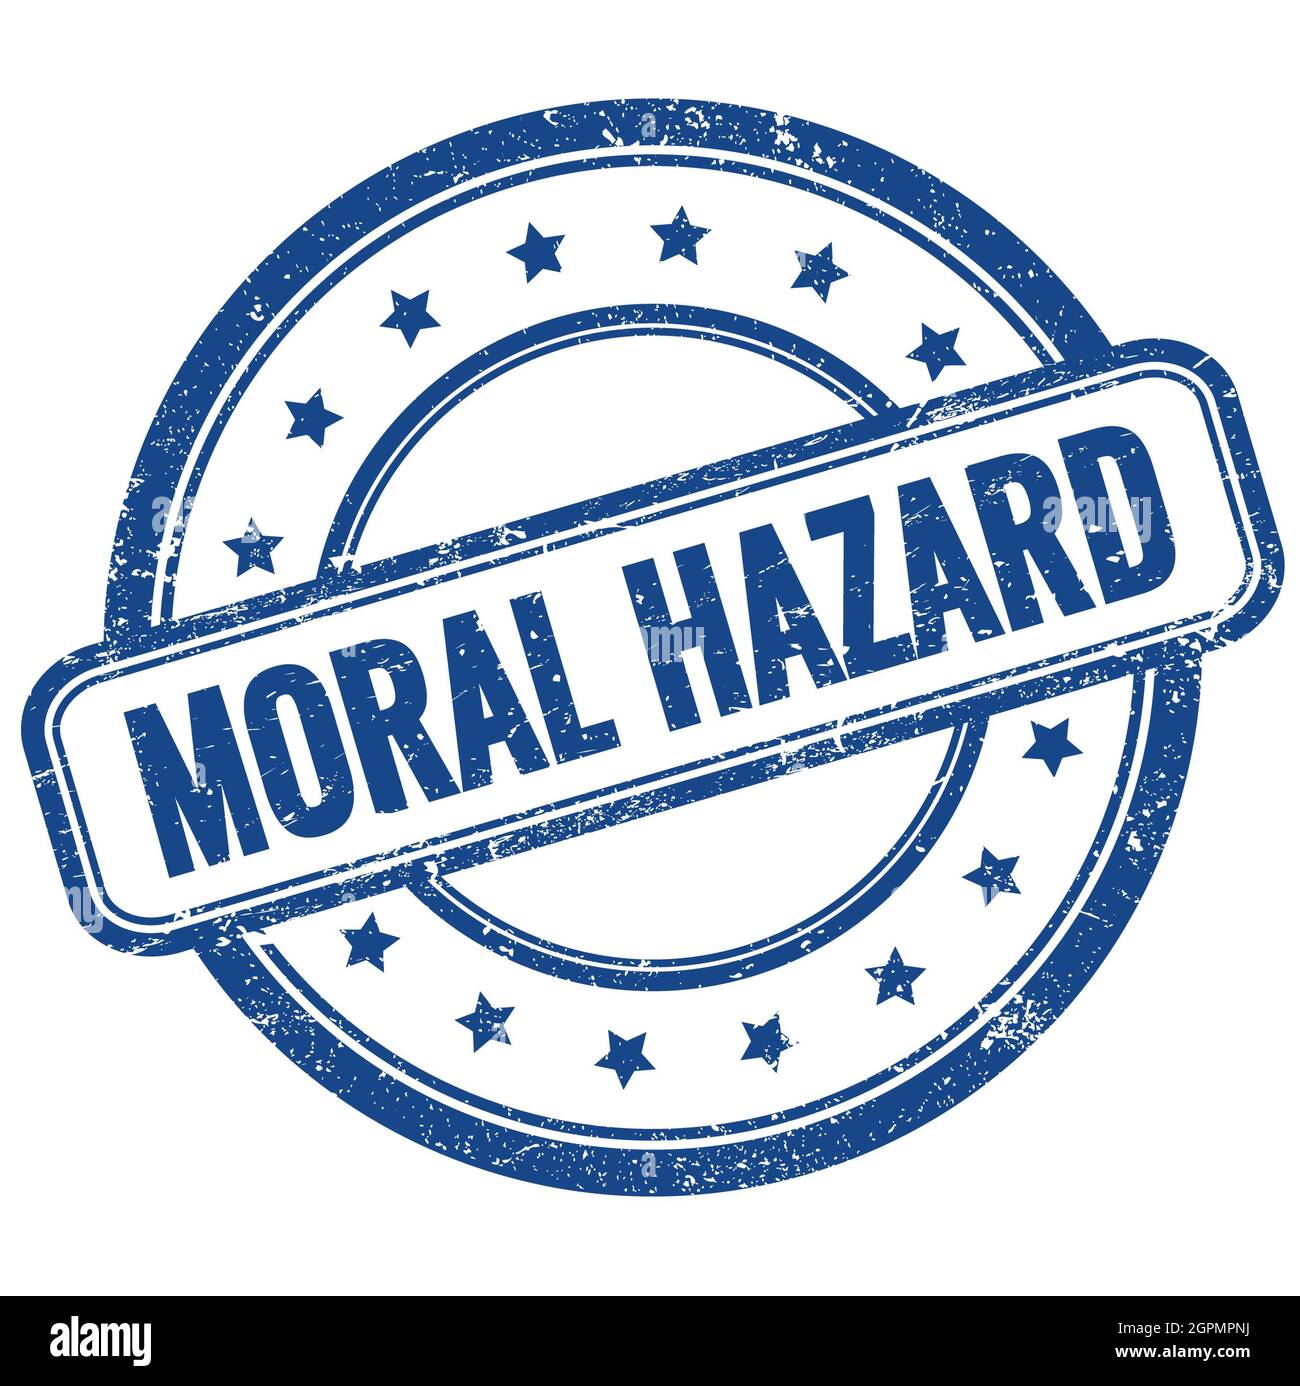 MORAL HAZARD text on blue vintage grungy round rubber stamp. Stock Photo